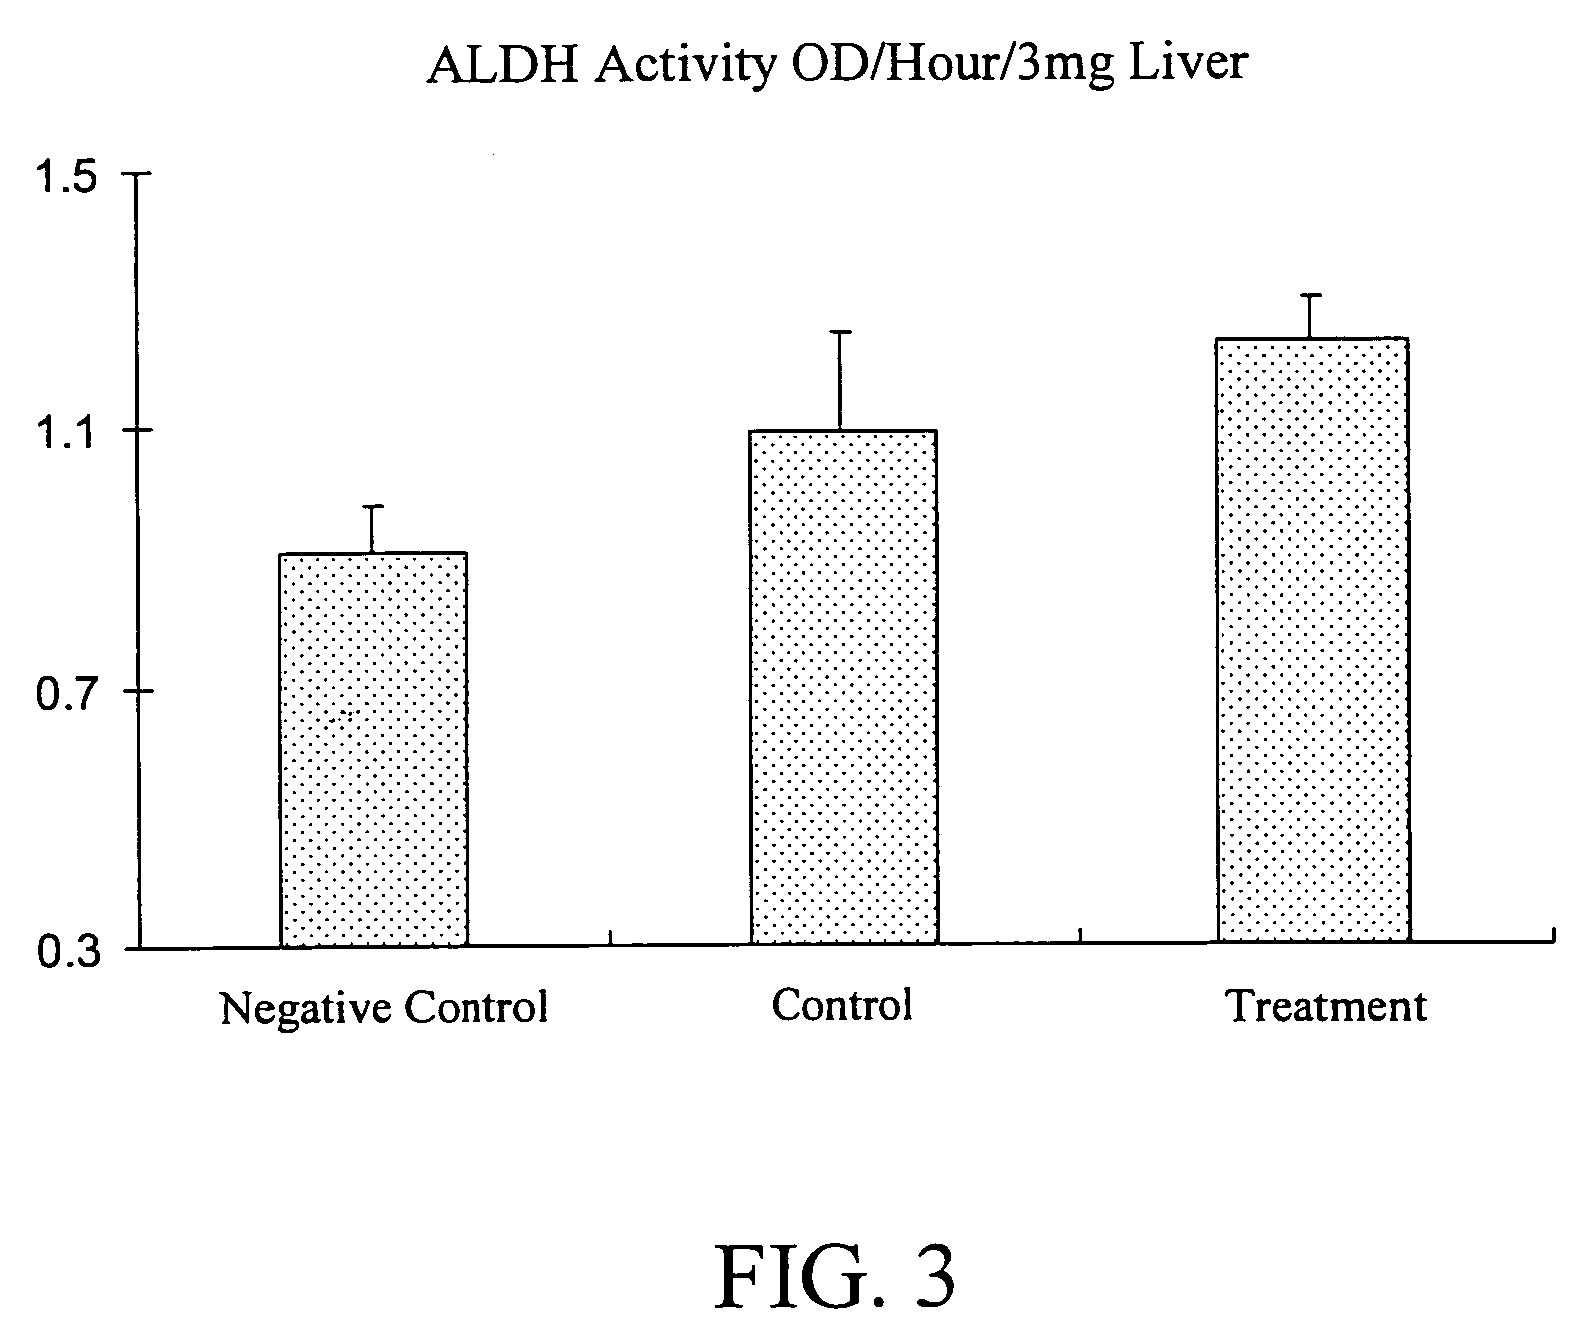 Materials and methods for improving alcohol metabolism and alleviating the effects of hangovers